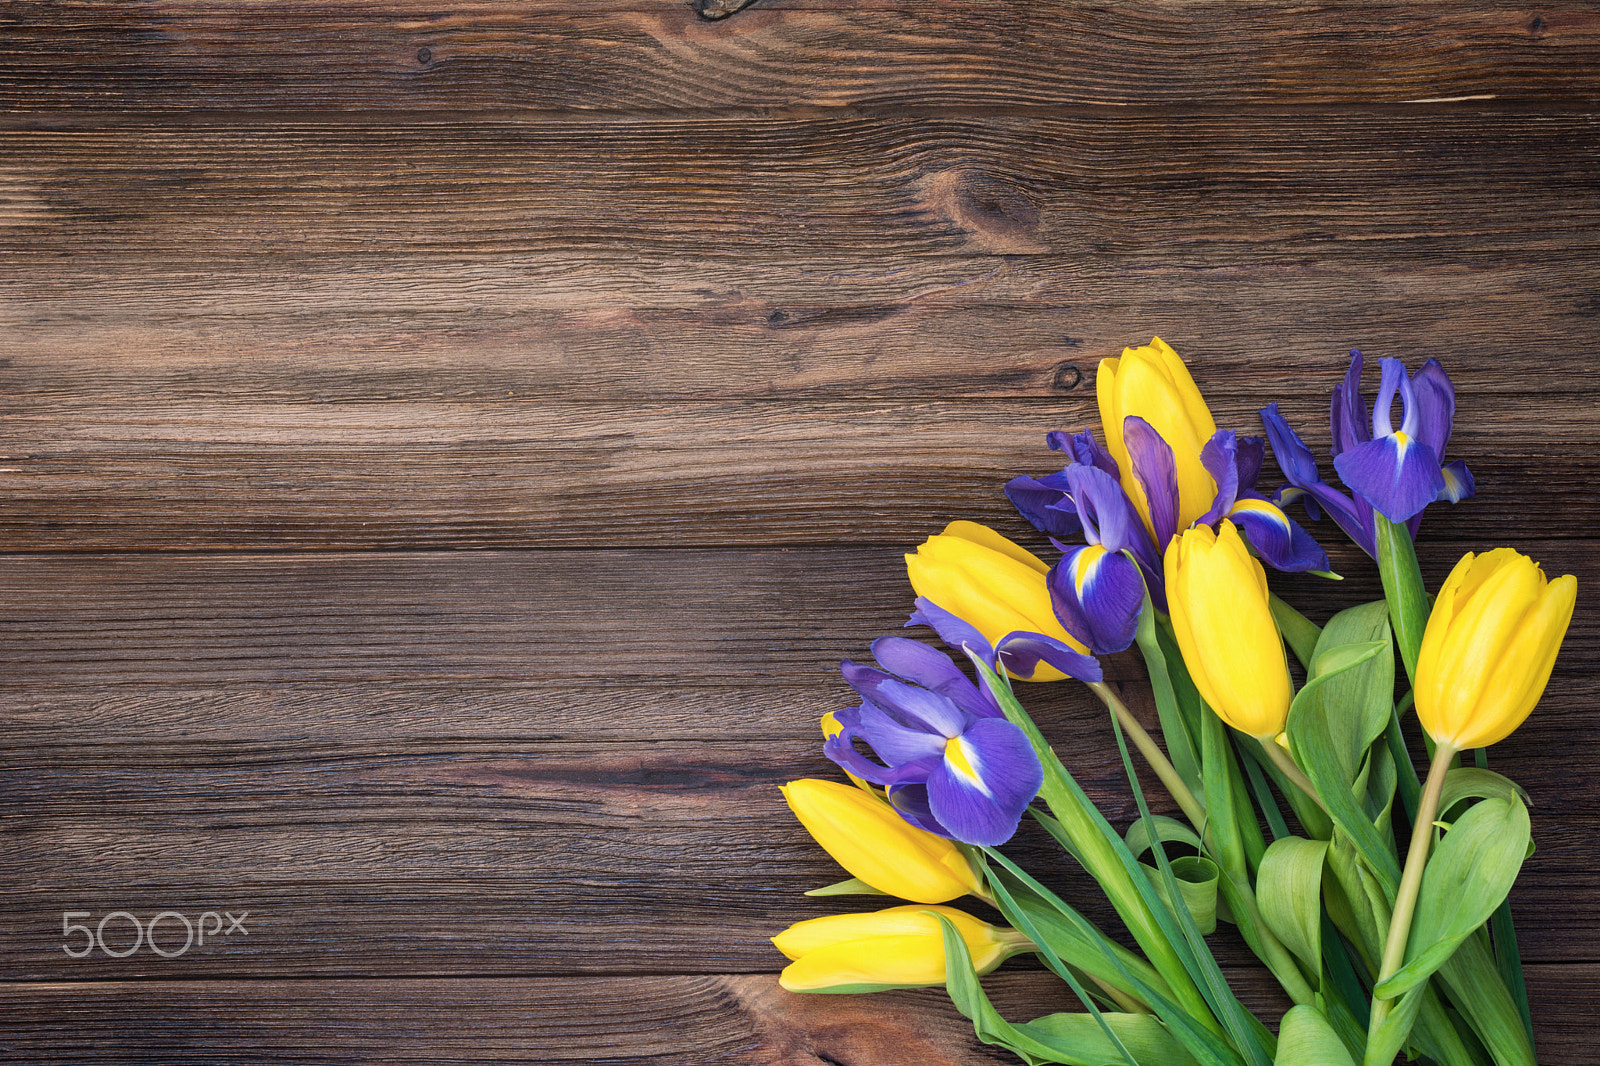 Nikon D7100 sample photo. Tulips and irises on wooden background photography